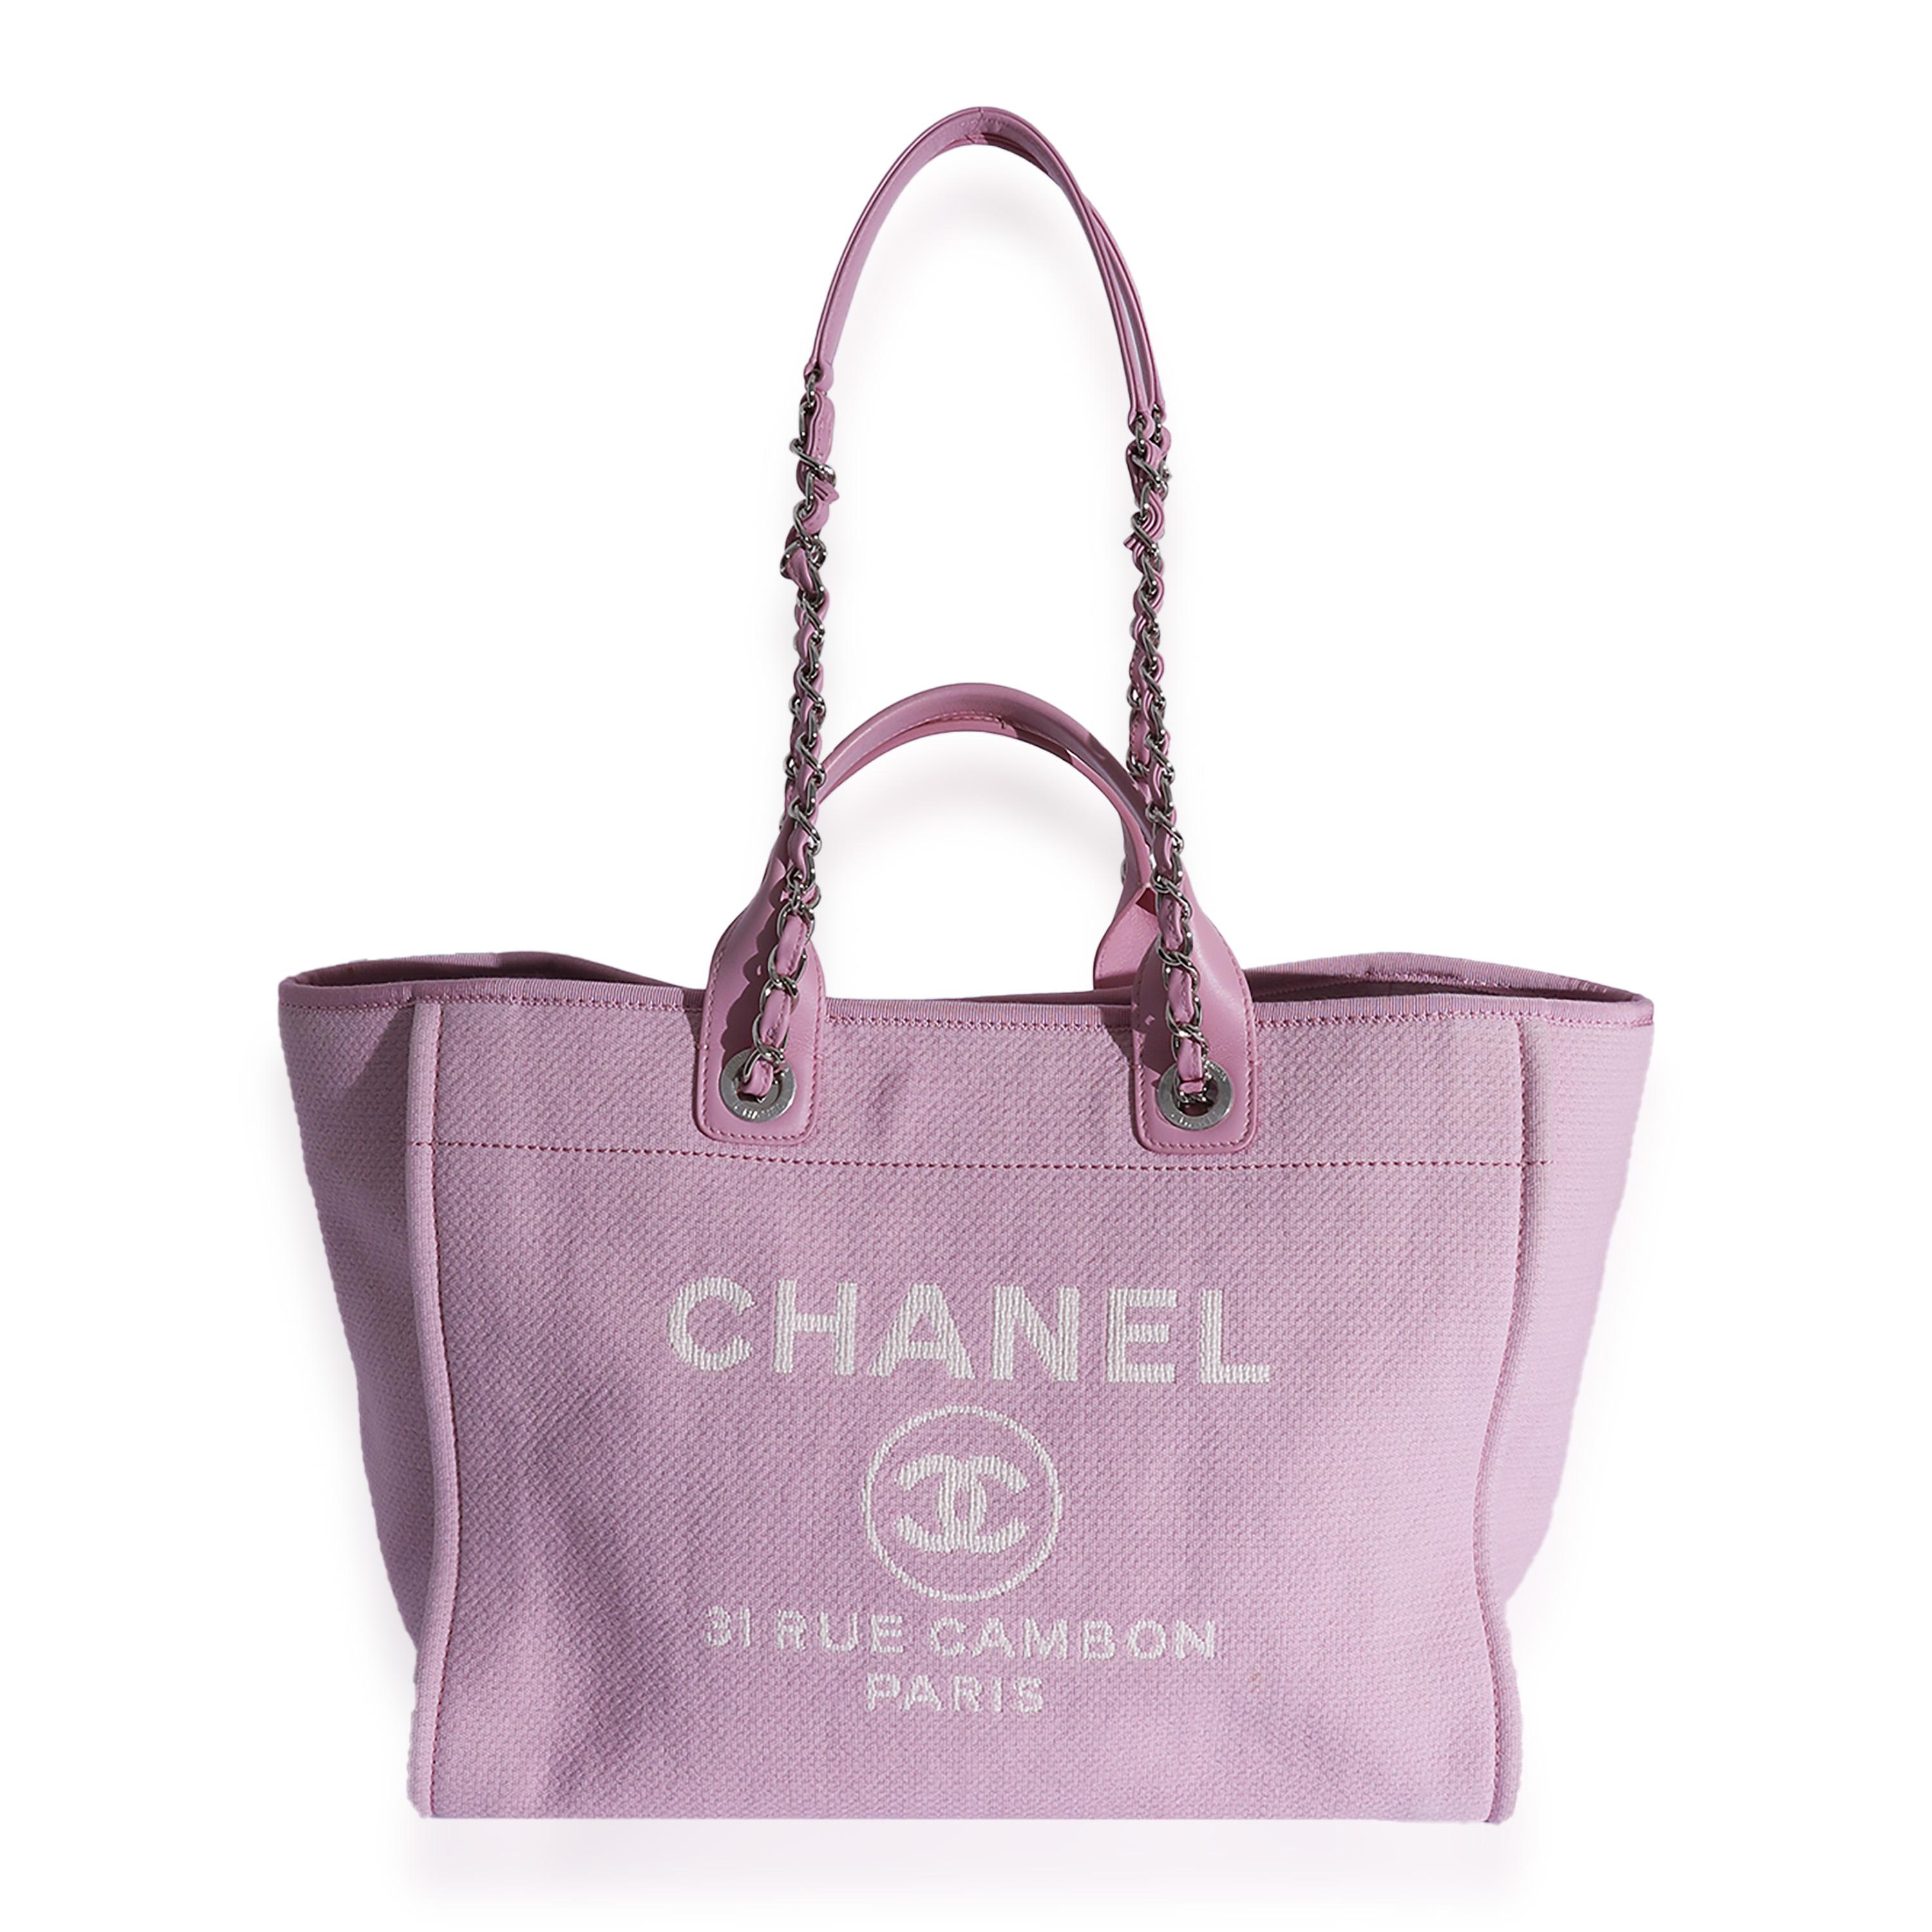 Listing Title: Chanel Pink Canvas Large Deauville Tote
SKU: 125220
Condition: Pre-owned 
Handbag Condition: Very Good
Condition Comments: Very Good Condition. Plastic at some hardware. Light peeling at handles. Light exterior scuffing at corners and